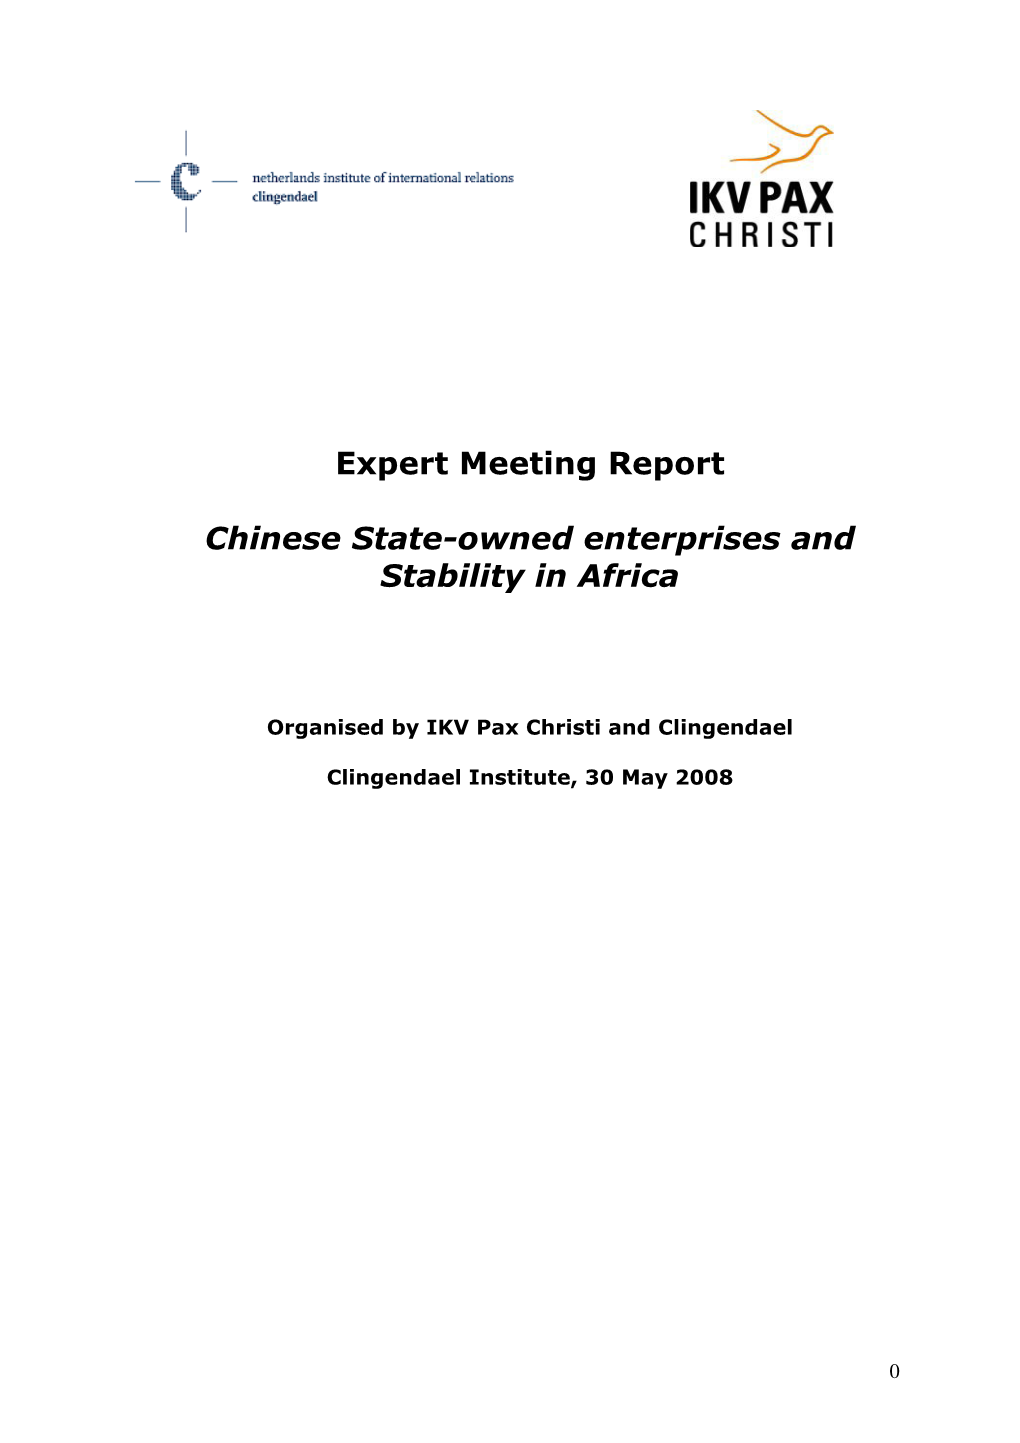 Expert Meeting Report Chinese State-Owned Enterprises And